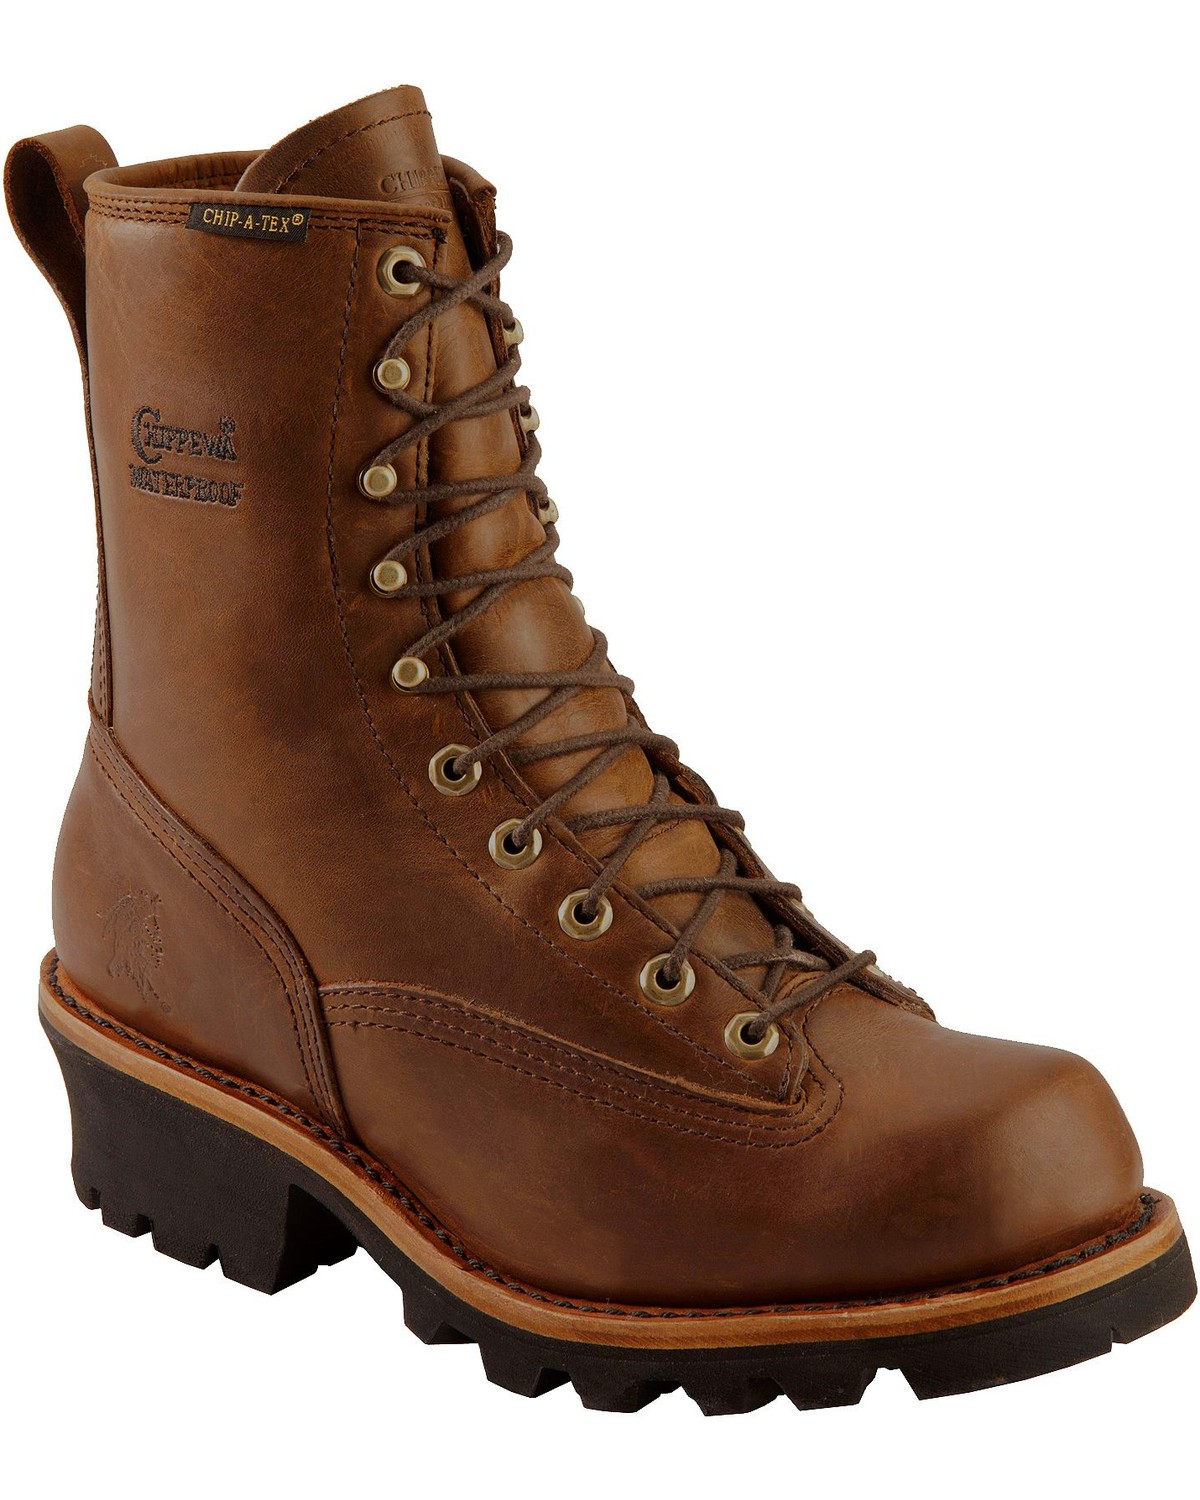 Chippewa Men's Lace-Up Logger Boots - Steel Toe